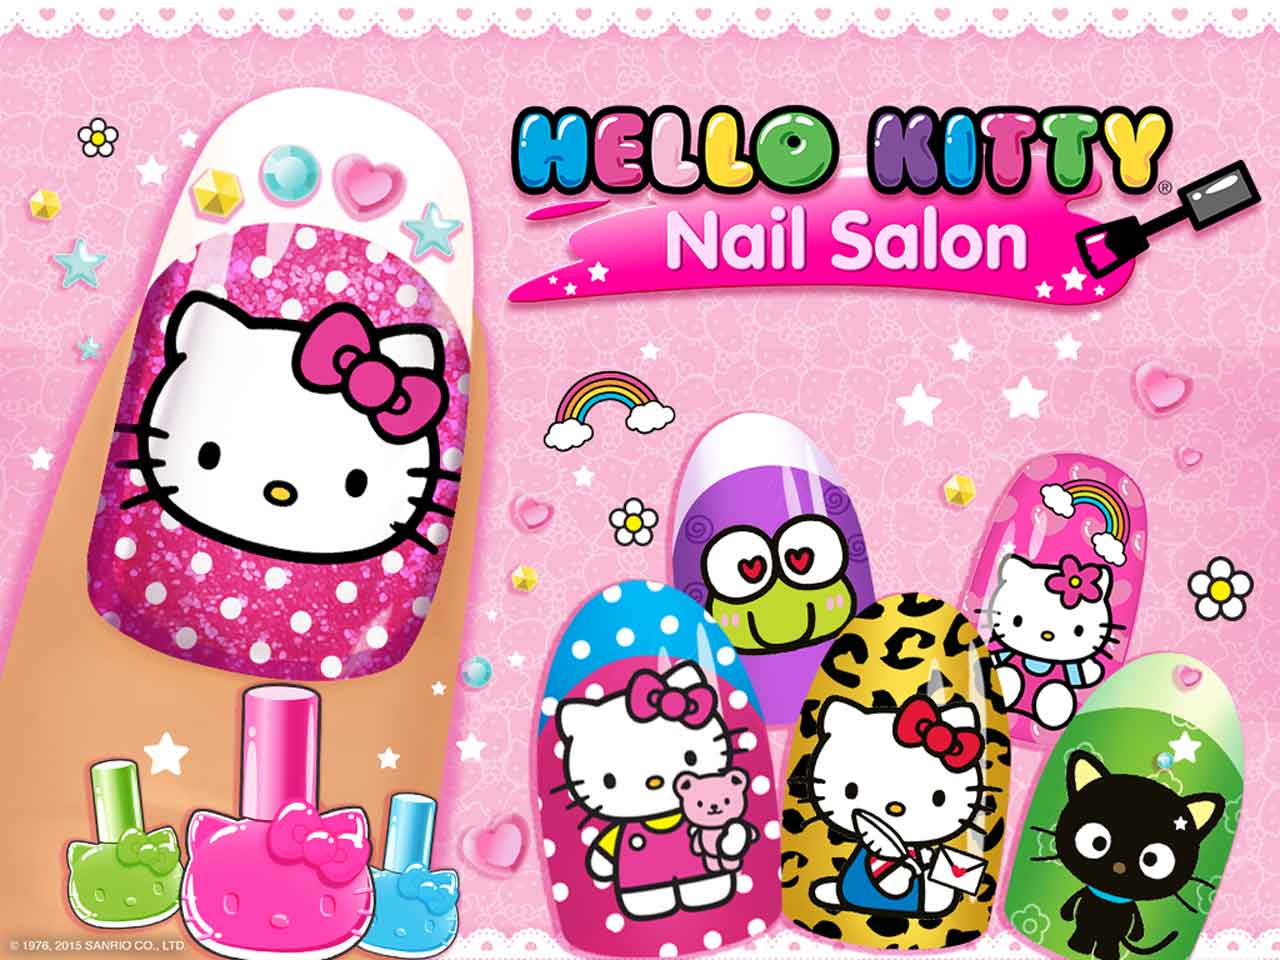 15 Game Hello Kitty  Terbaik di Android Offline Online 